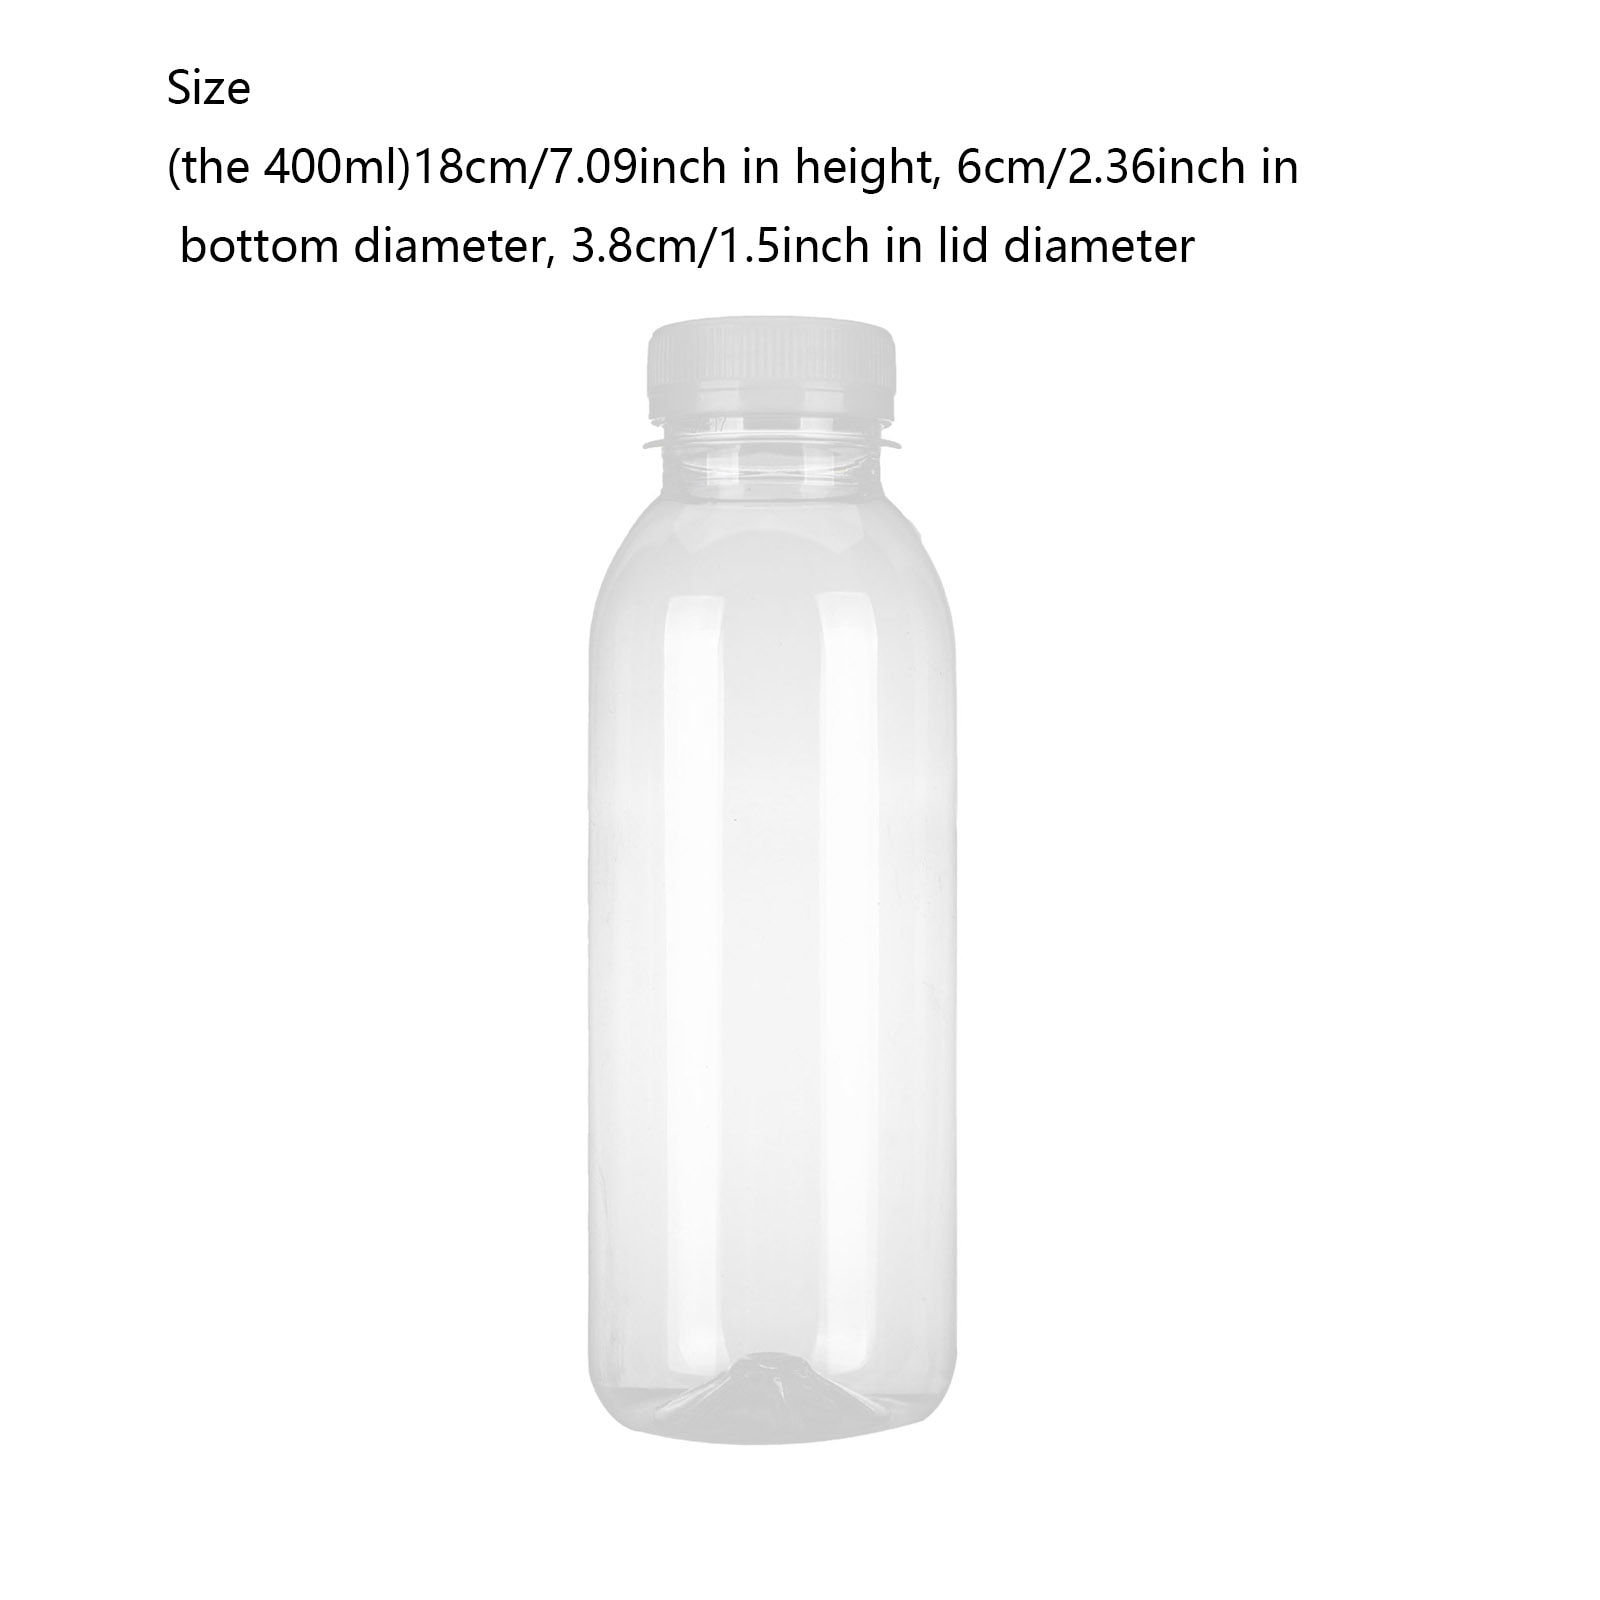 300/350/400ml Transparent Transparent Water Bottle Plastic Empty Soft Drink Containers Beverage Bottles with Lids